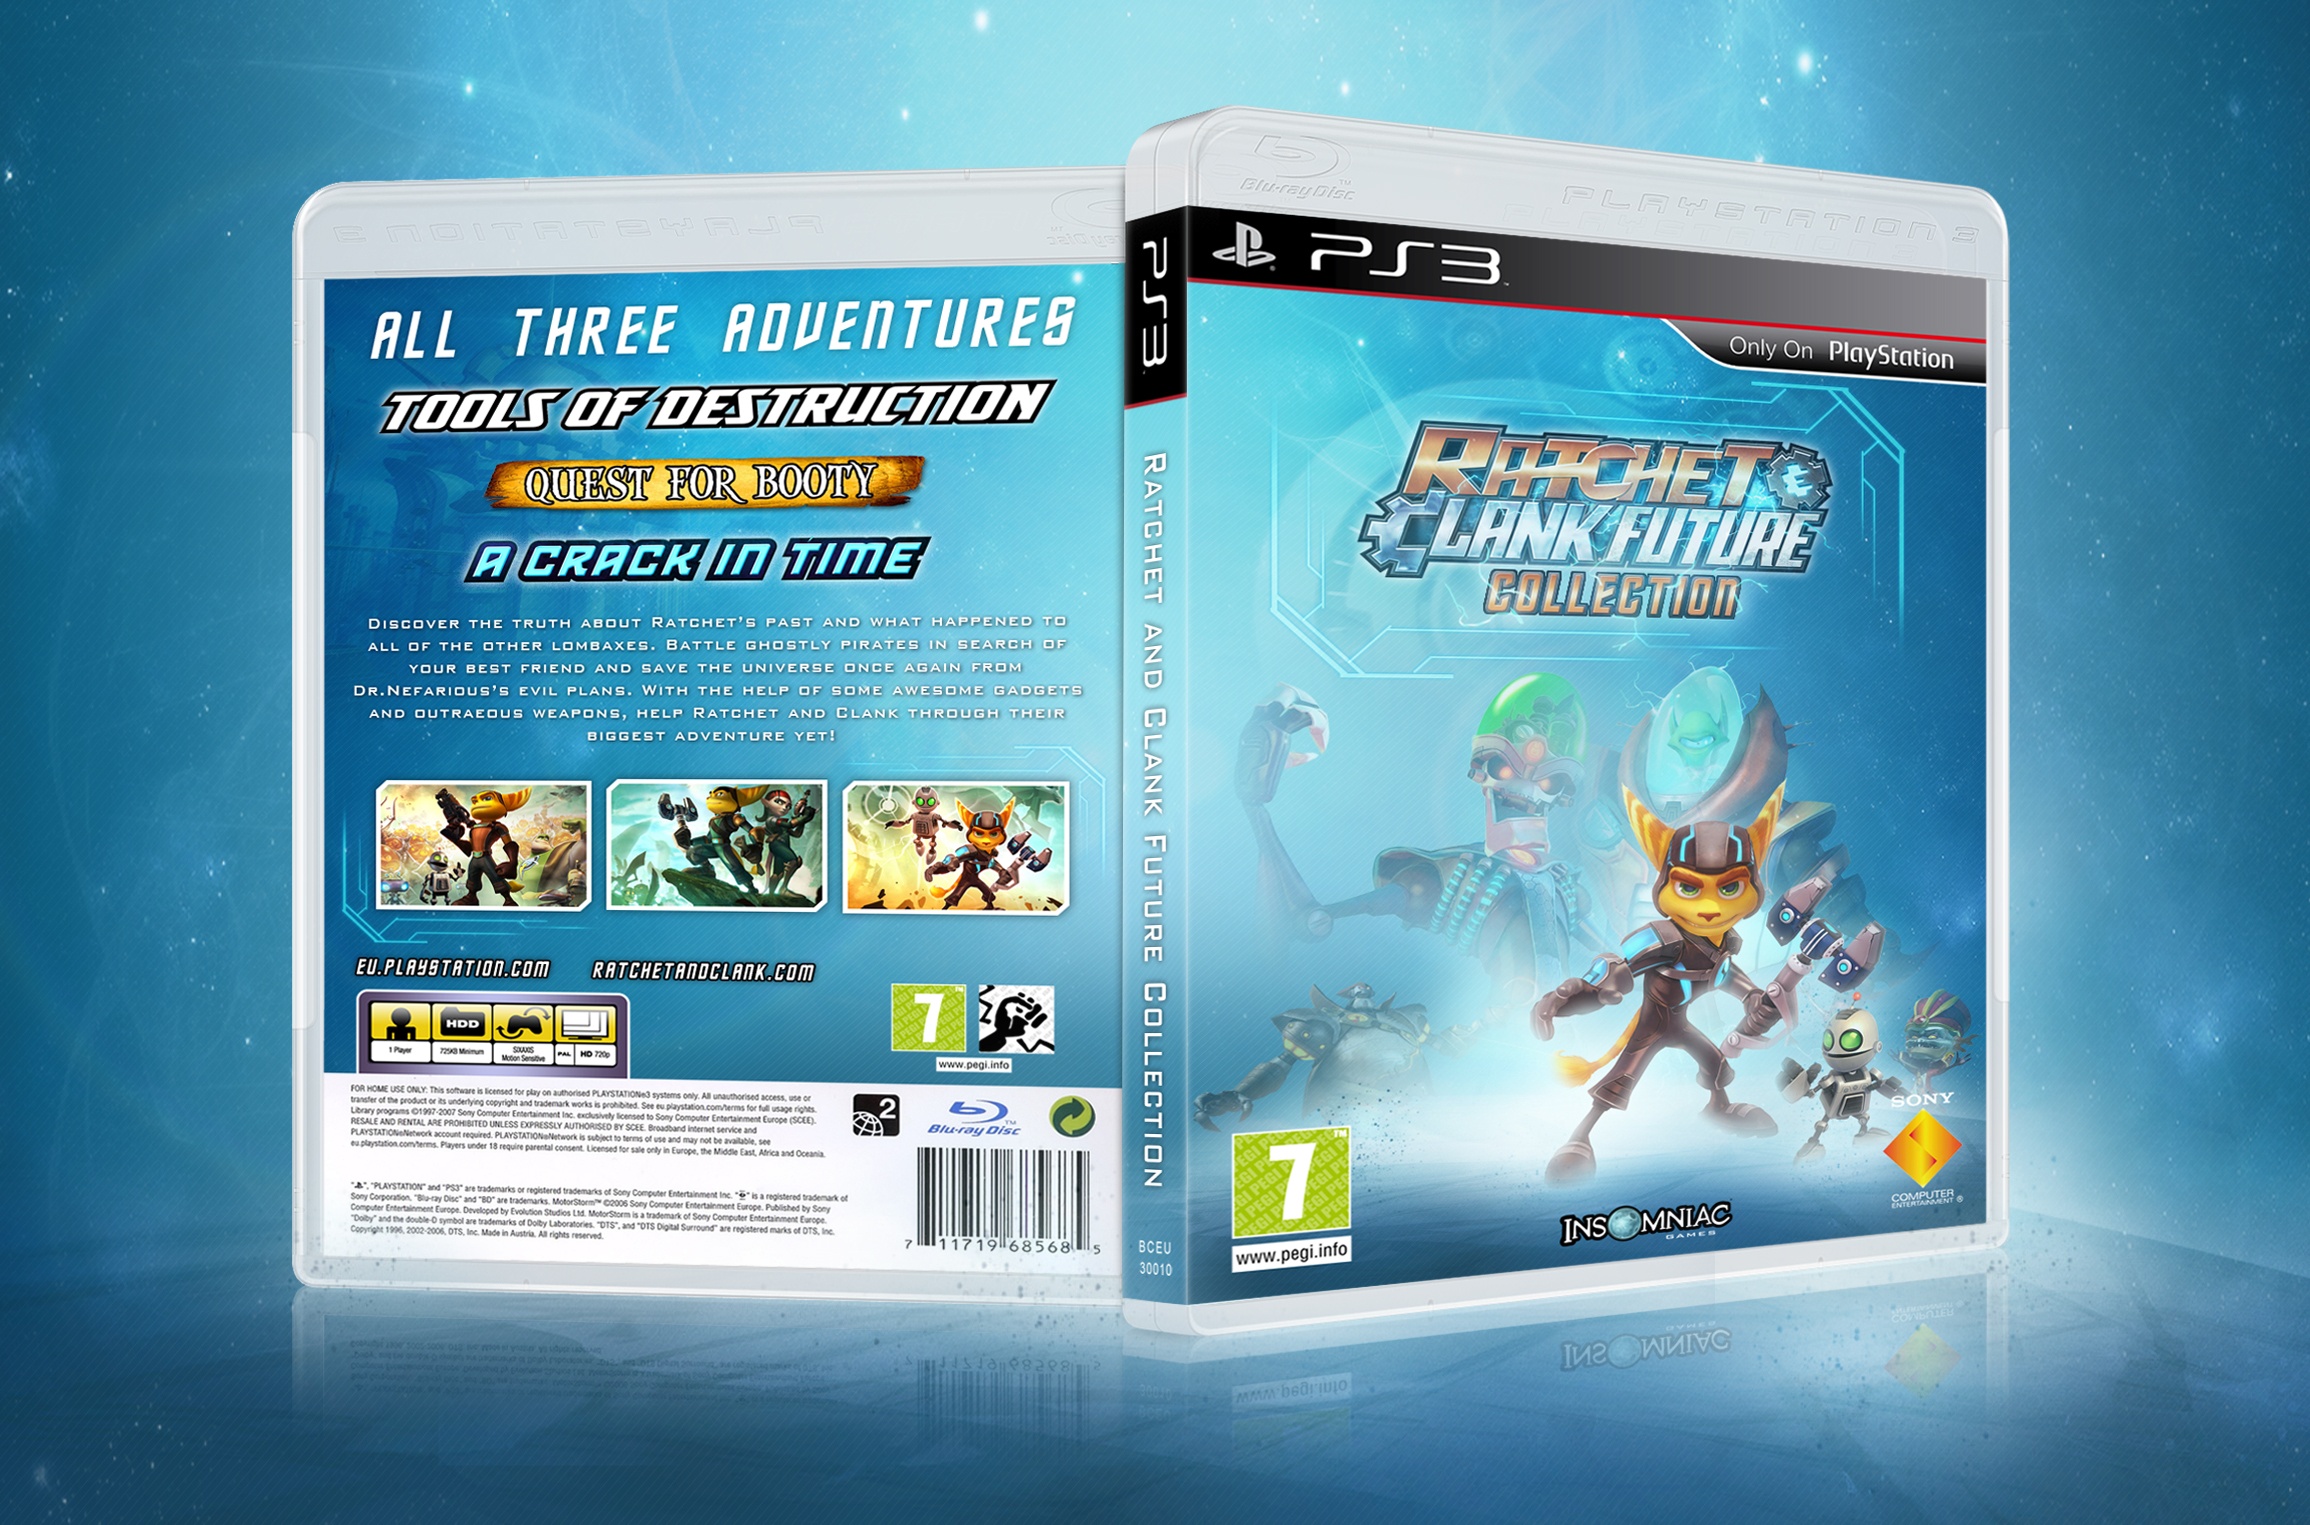 Ratchet and Clank Future Collection box cover